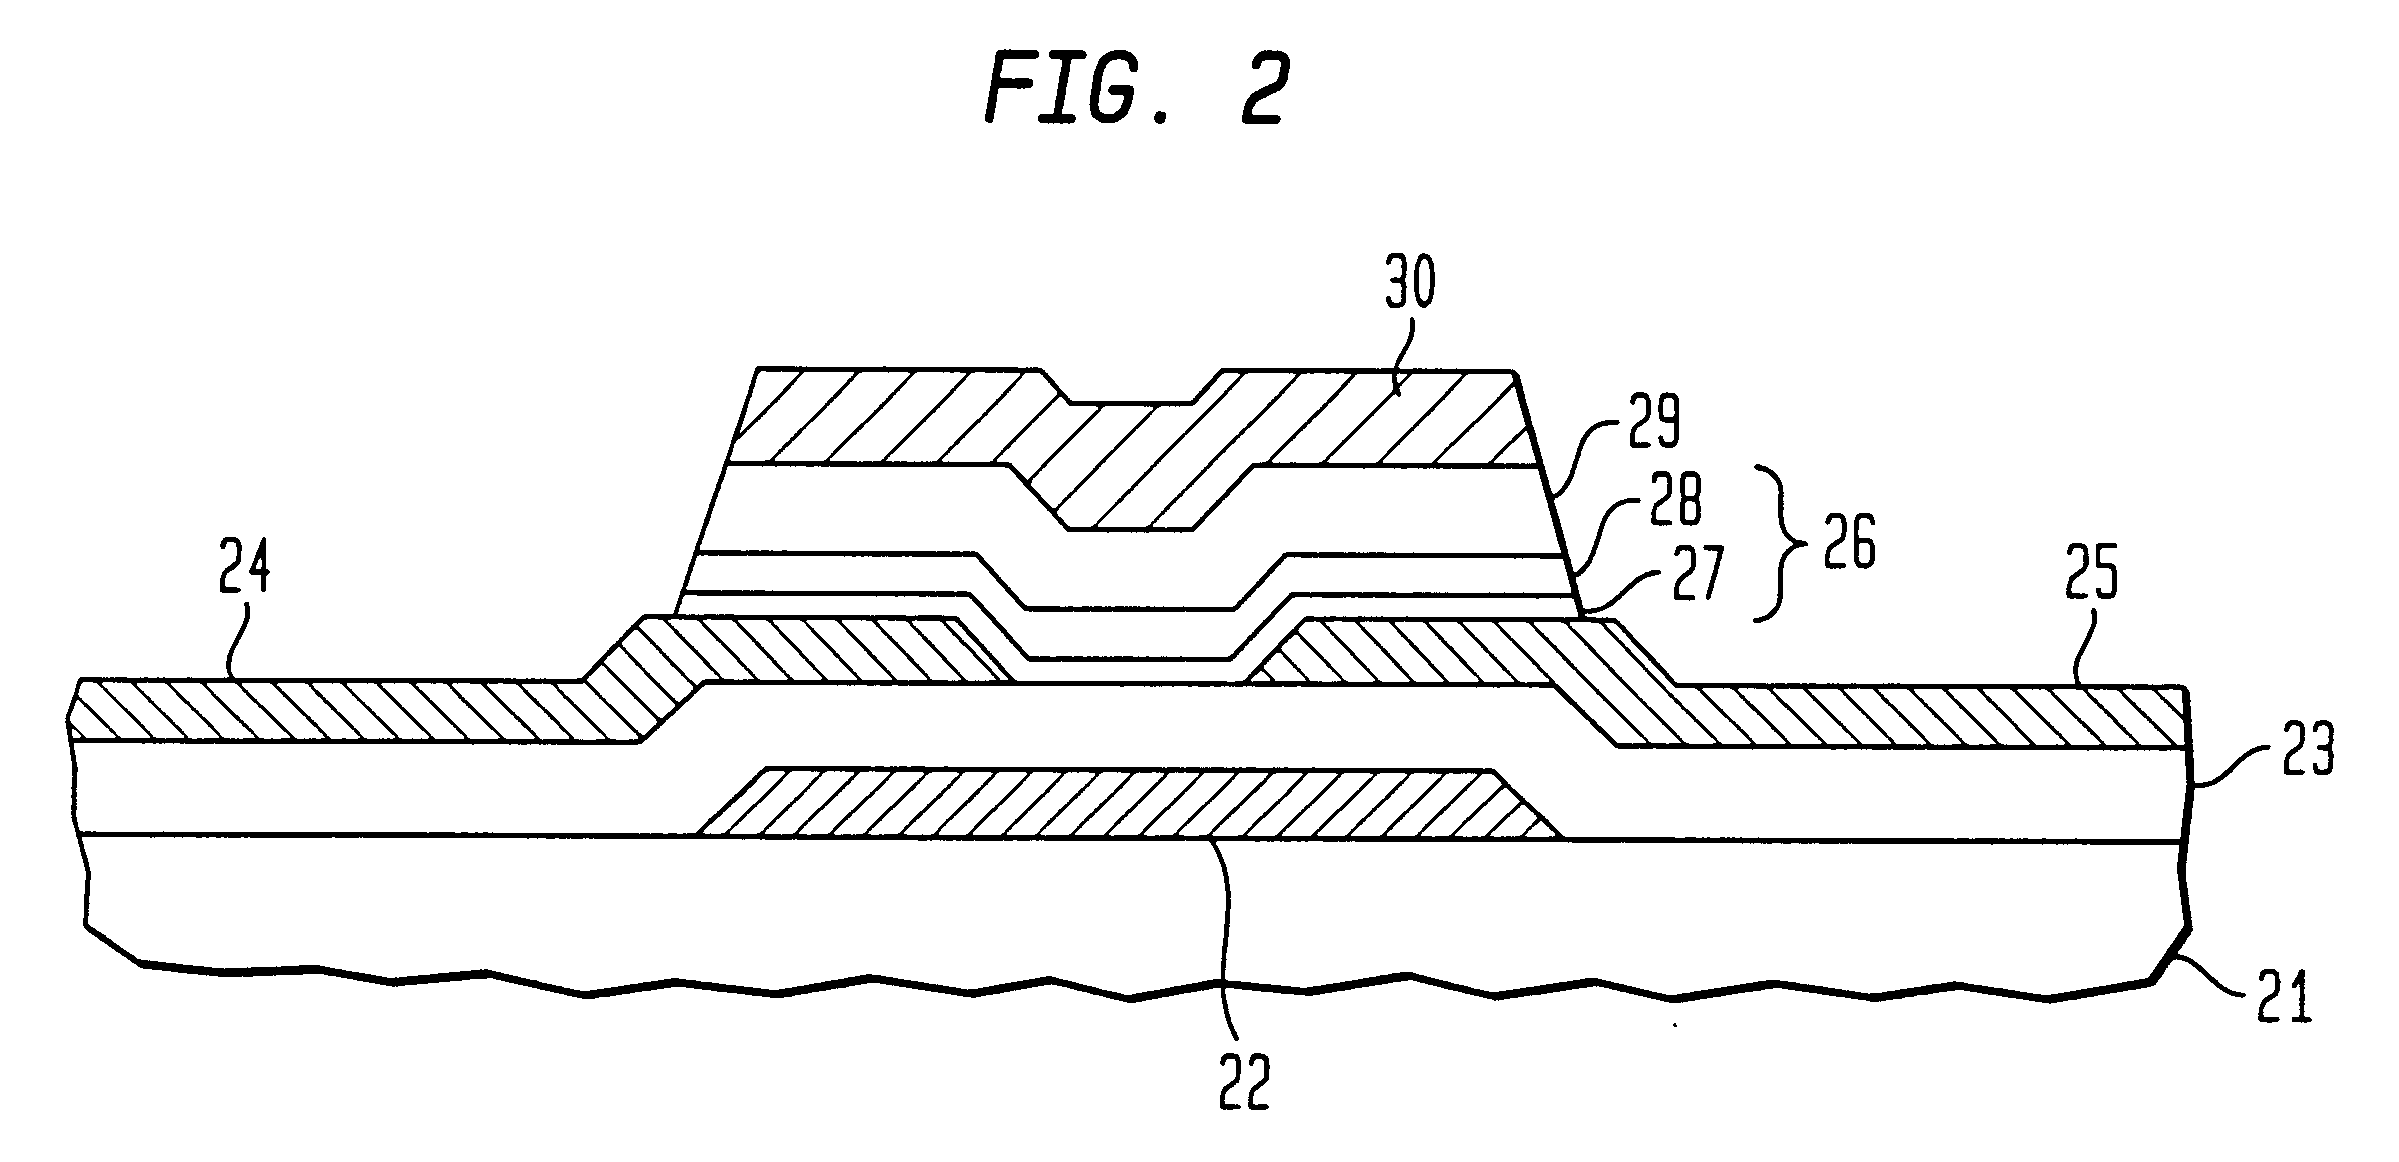 Thin film transistor including an amorphous layer and a high-defect density layer